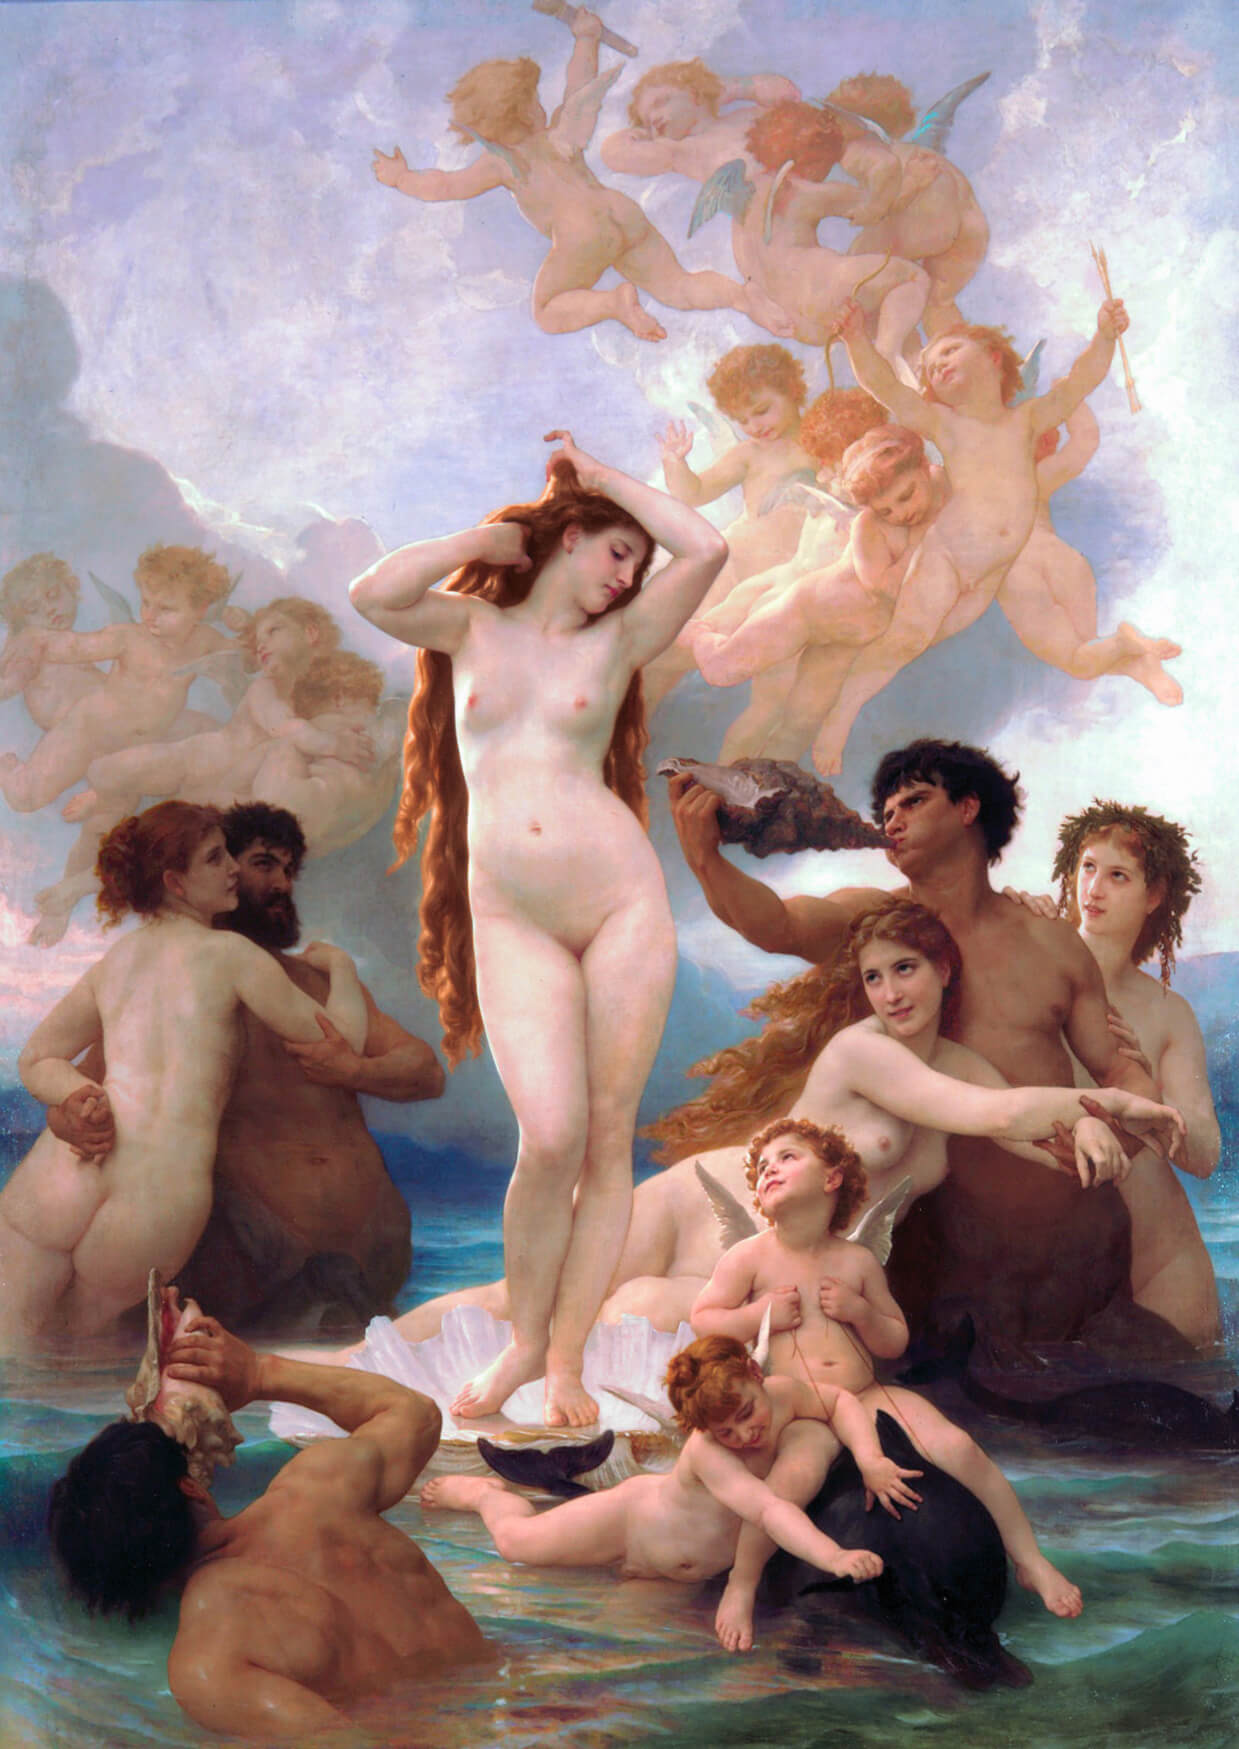 What is Romanticism in Art The Birth of Venus by William Adolphe Bouguereau